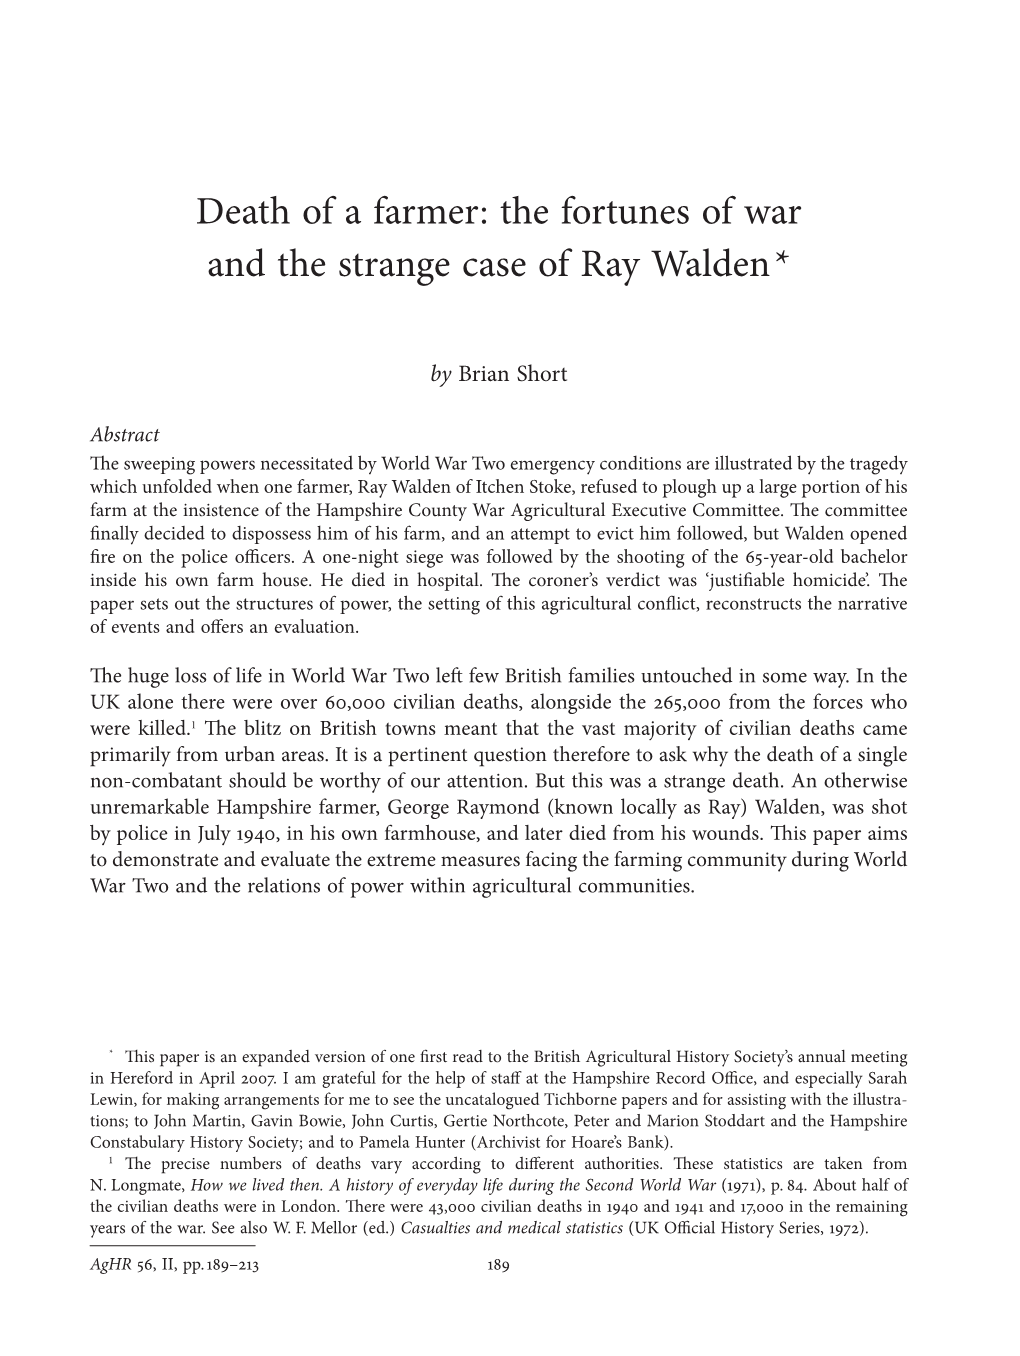 Death of a Farmer: the Fortunes of War and the Strange Case of Ray Walden*